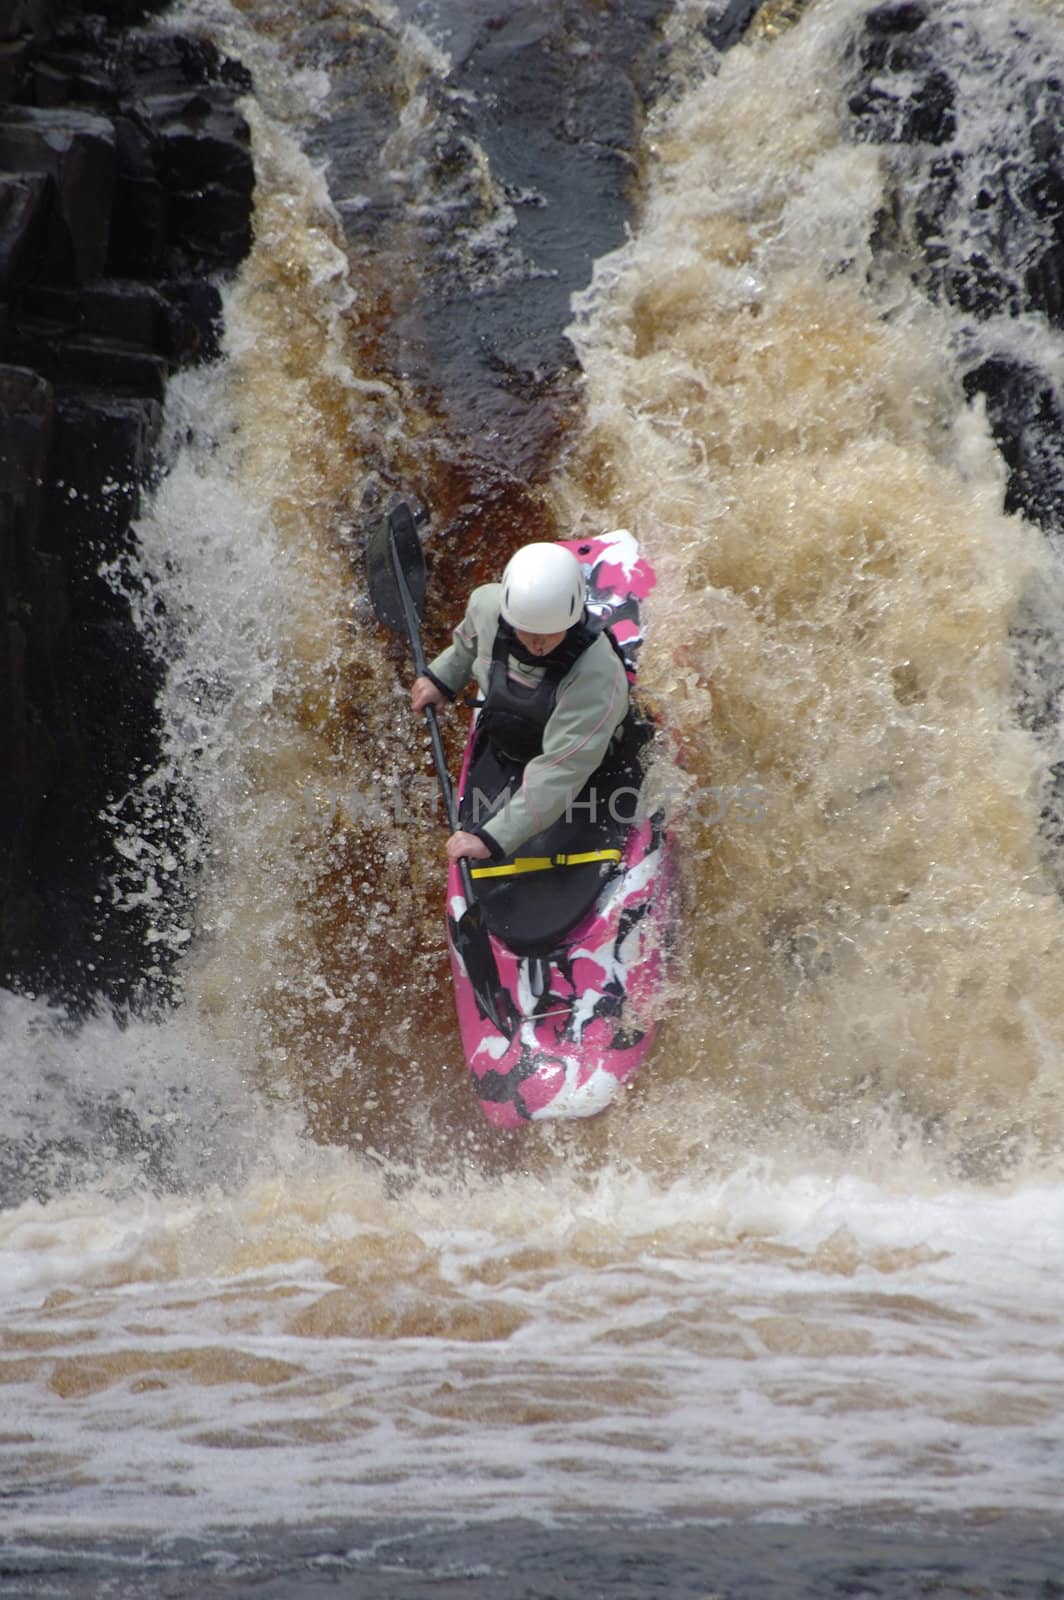 A canoeist, shooting a raging waterfall, on the Tees River, UK.